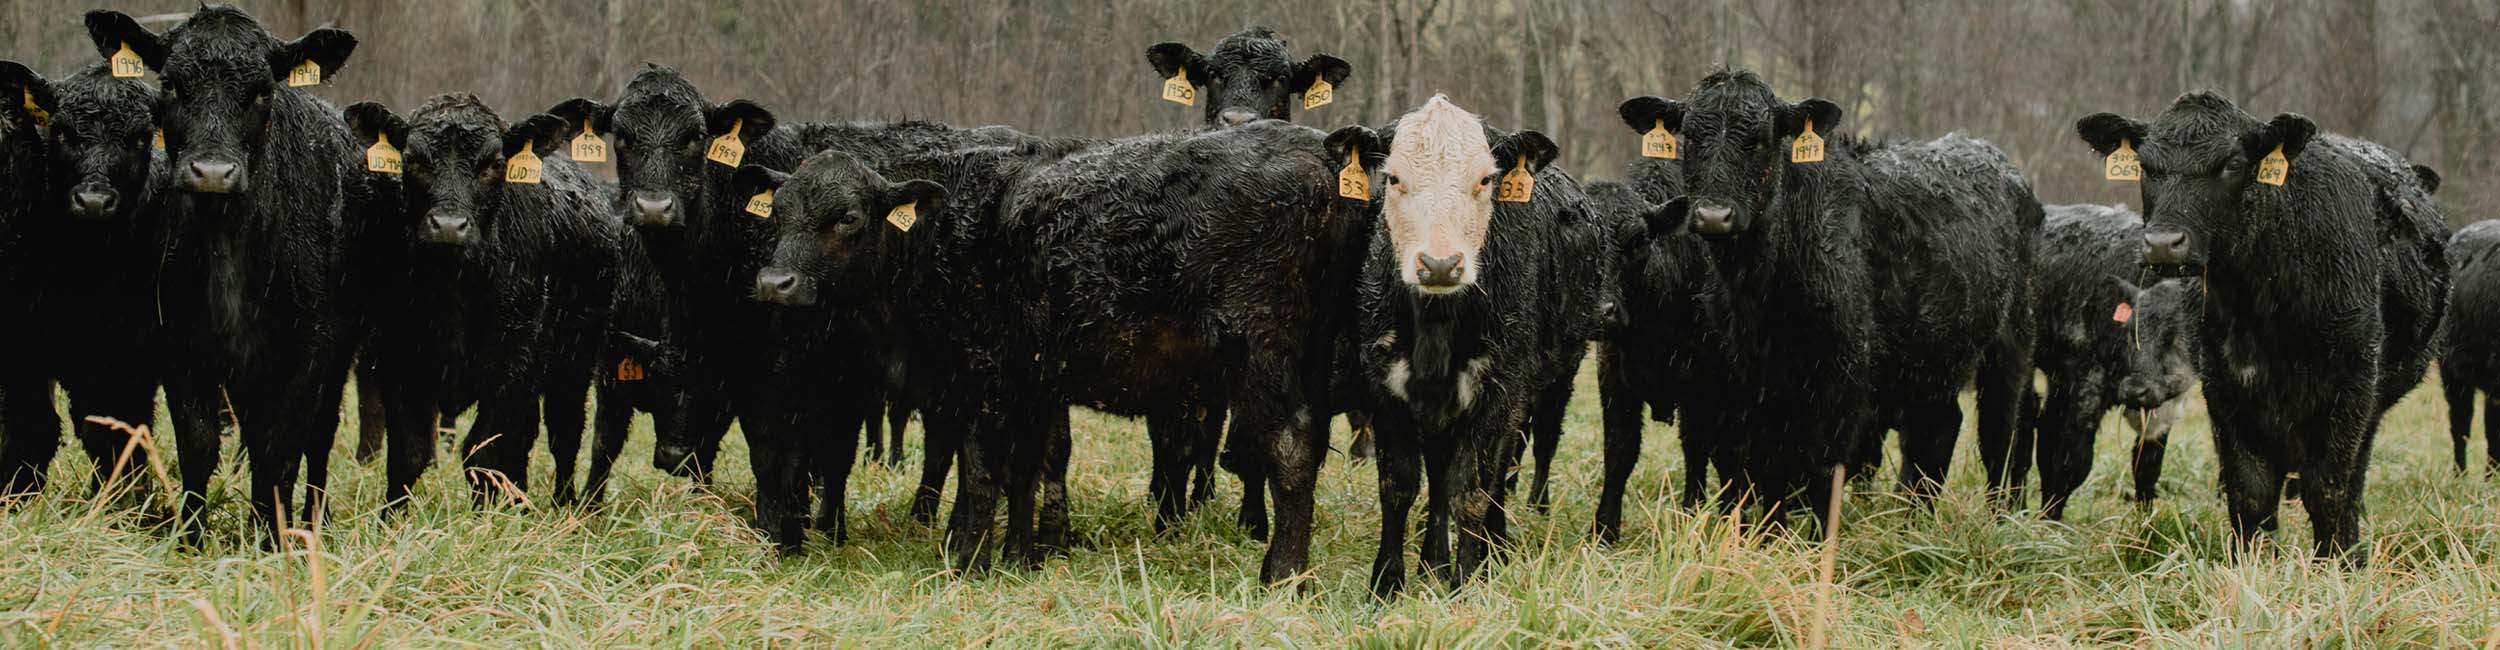 A group of cows with tags on their ears in a field looking at the camera.